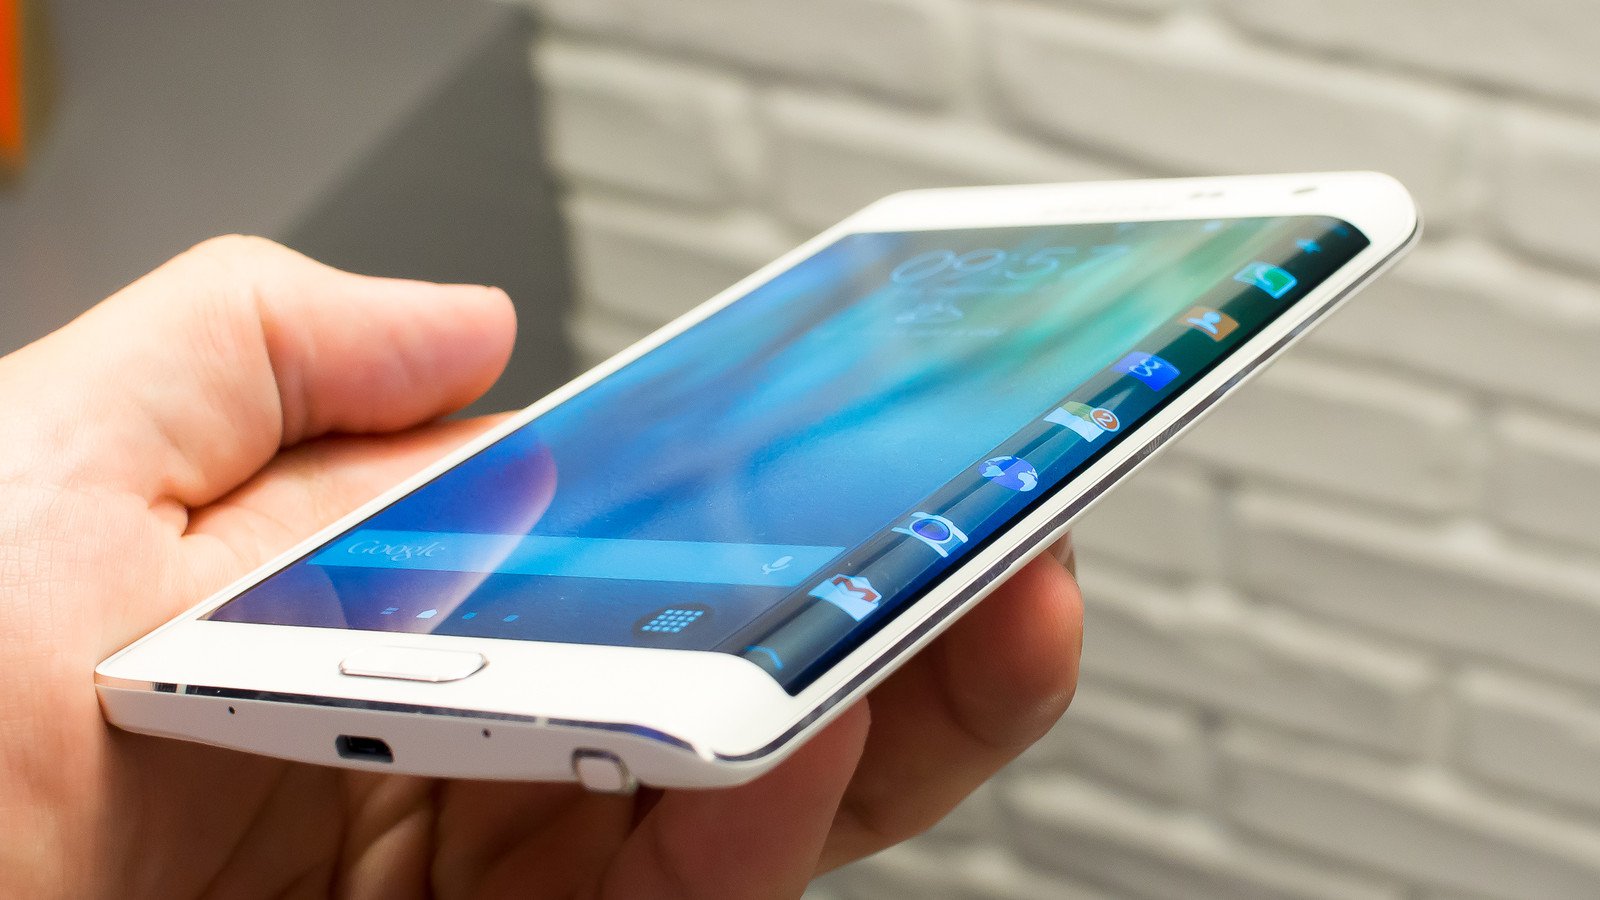 Leaked Details Of The Countries Where Samsung Galaxy Note Edge Will Be Released